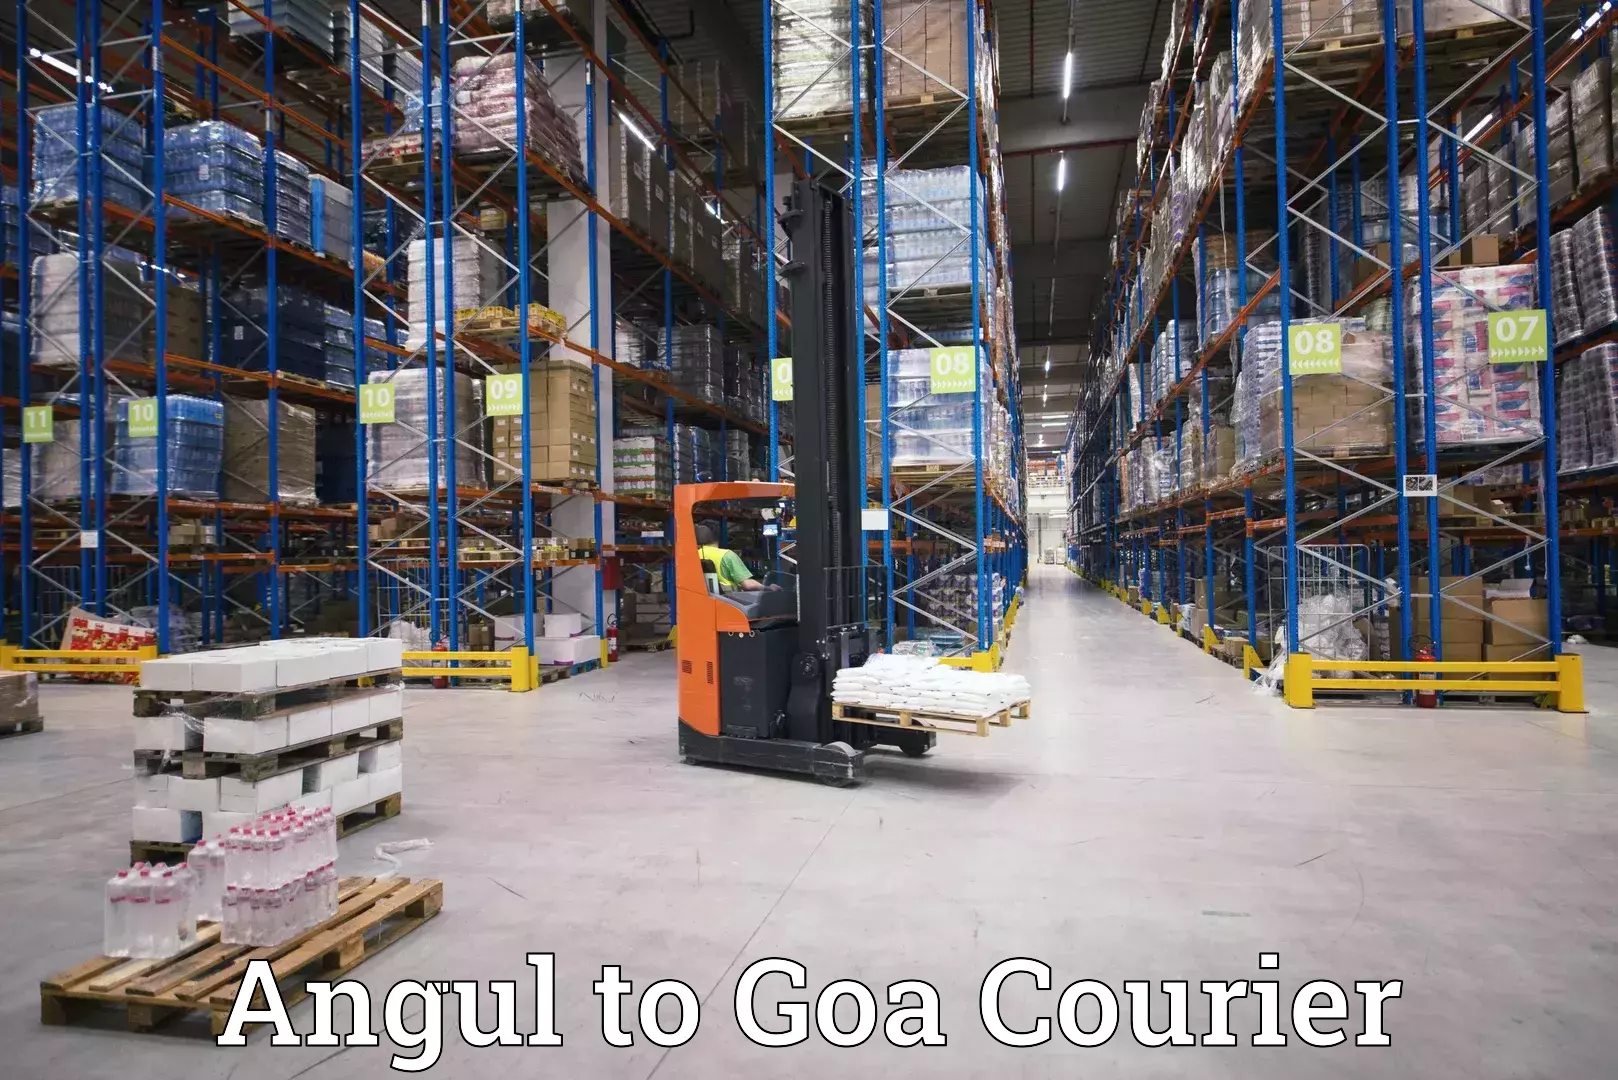 Courier service innovation Angul to Bardez